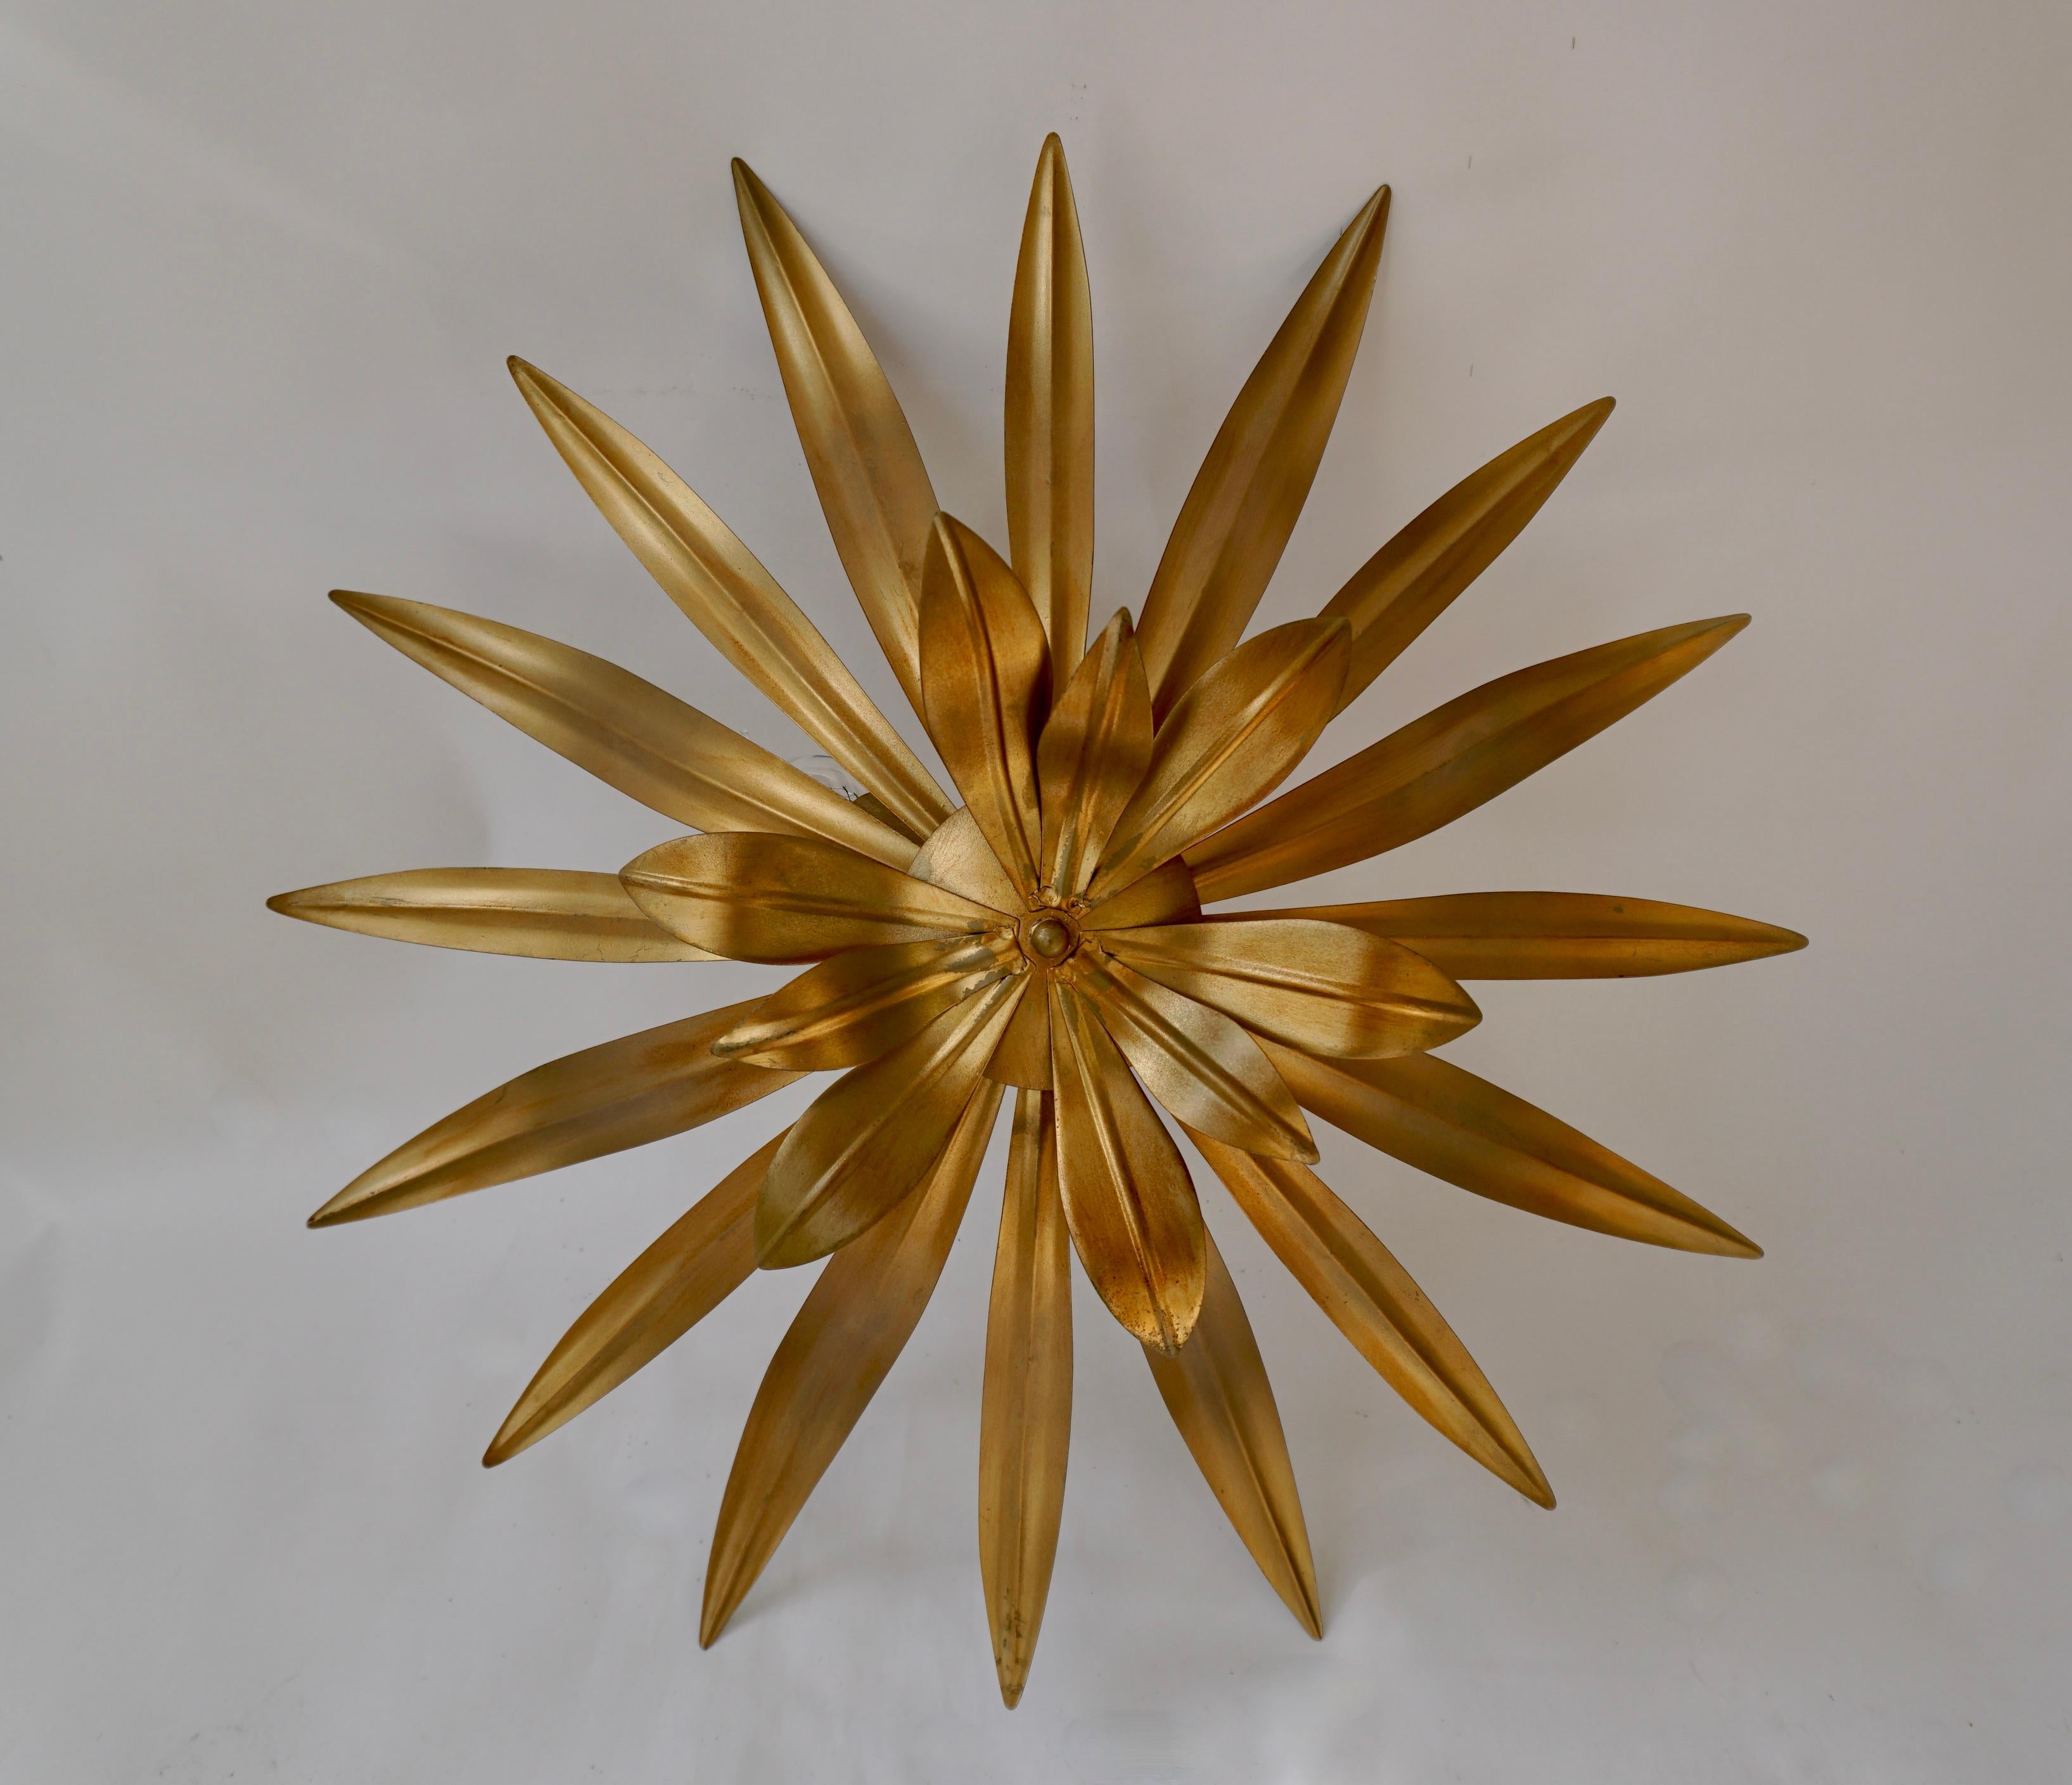 Botanical style meets a modern look in this 4-light statement semi-flush mount. Crafted from steel, it features a plant-inspired design with a curving shade made from leaf-like fronds hanging from a central arm and a circular canopy. A luminous